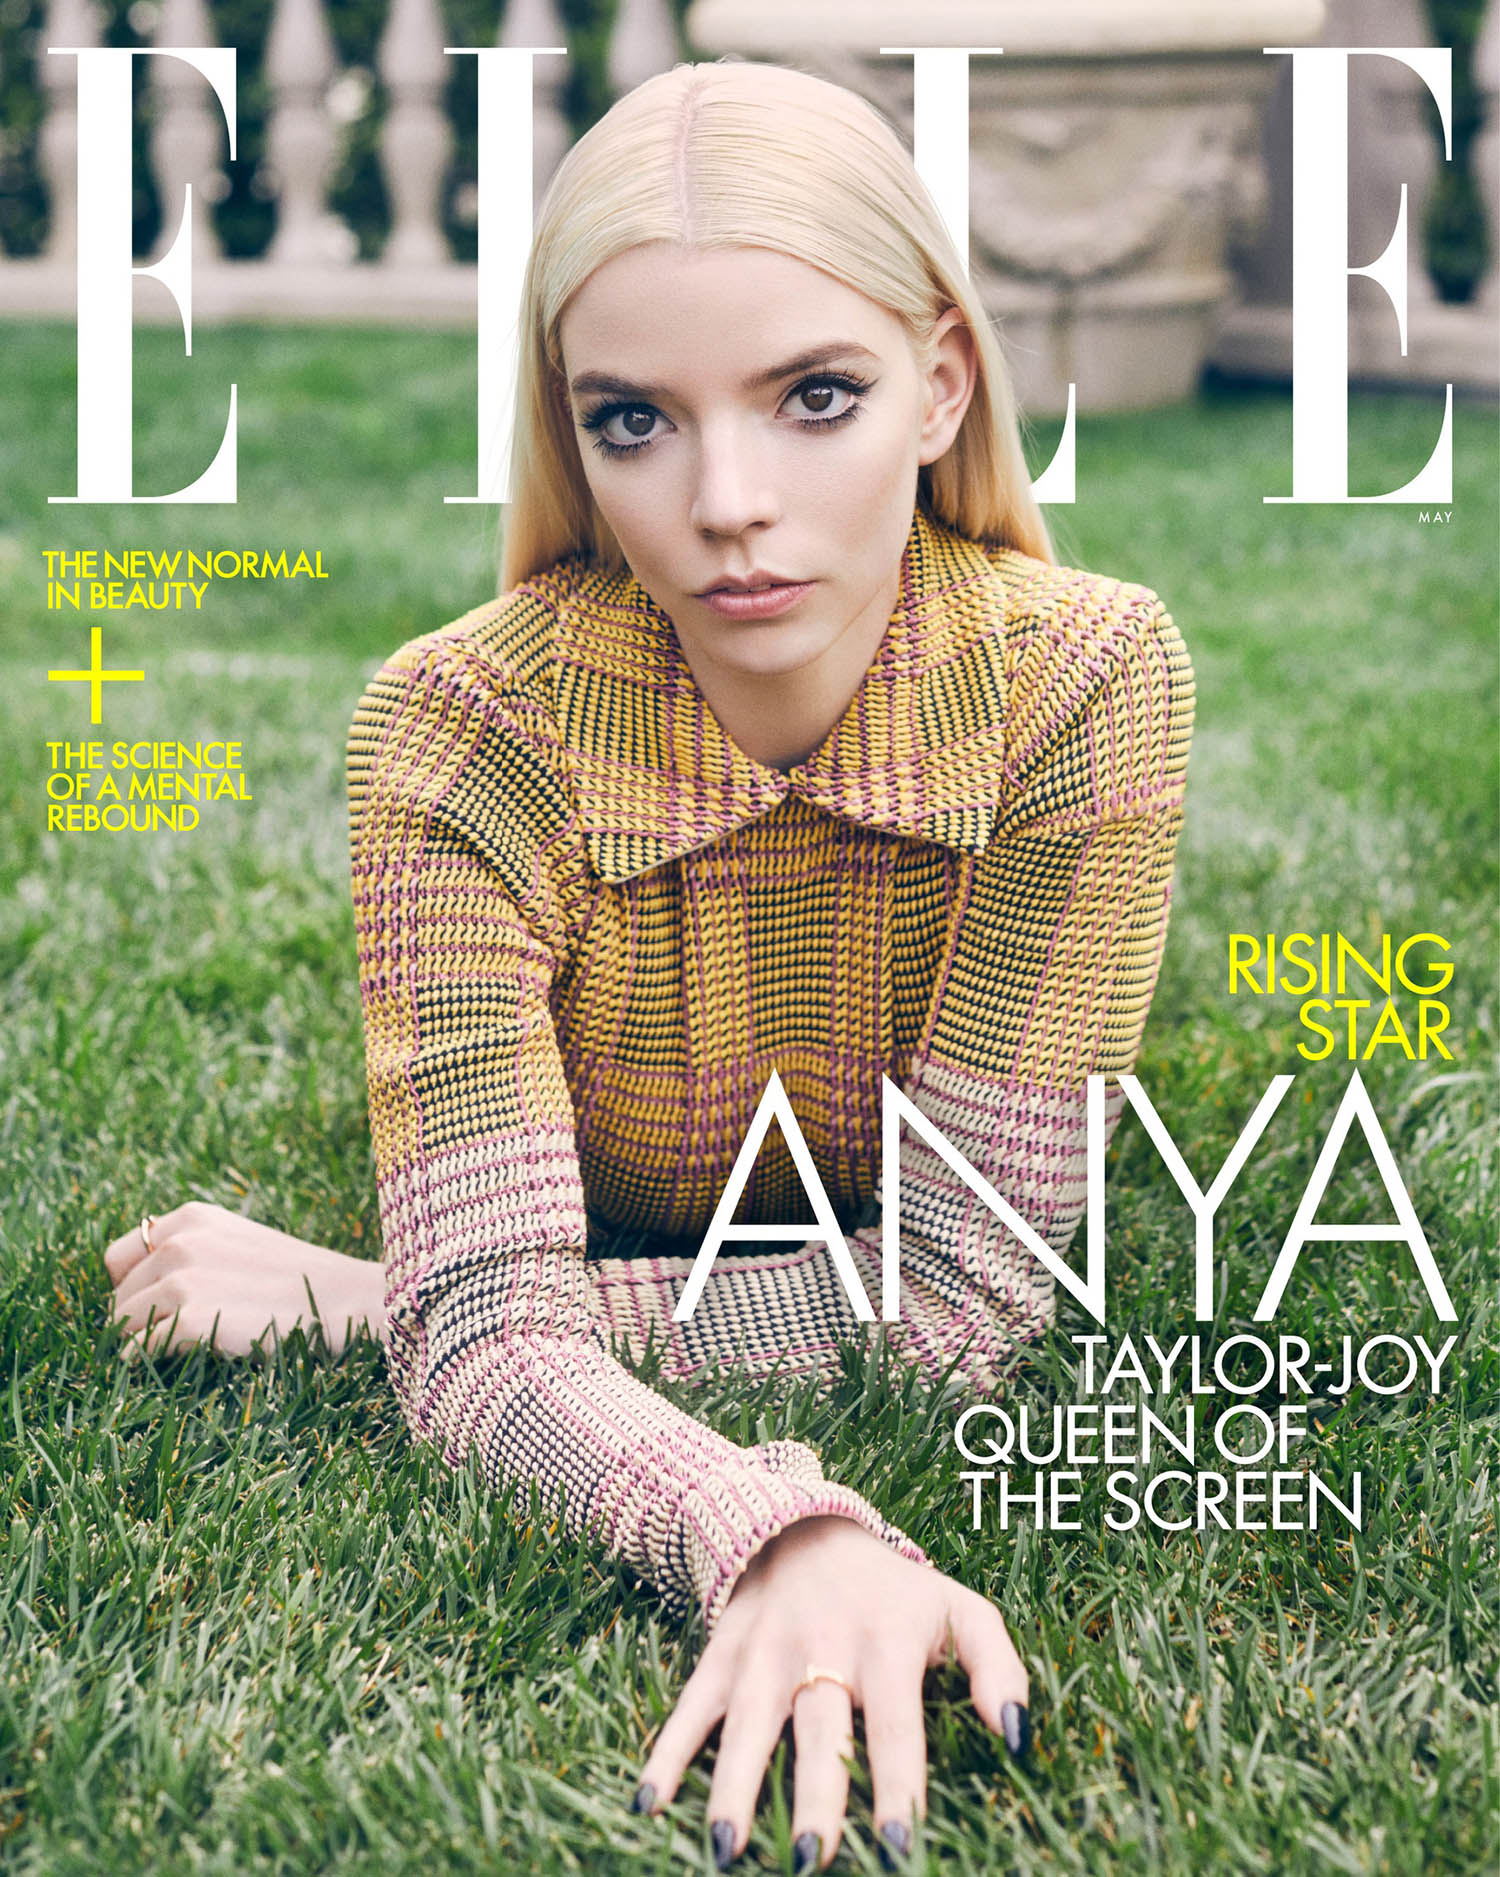 Anya Taylor-Joy covers Elle US May 2021 by Zoey Grossman